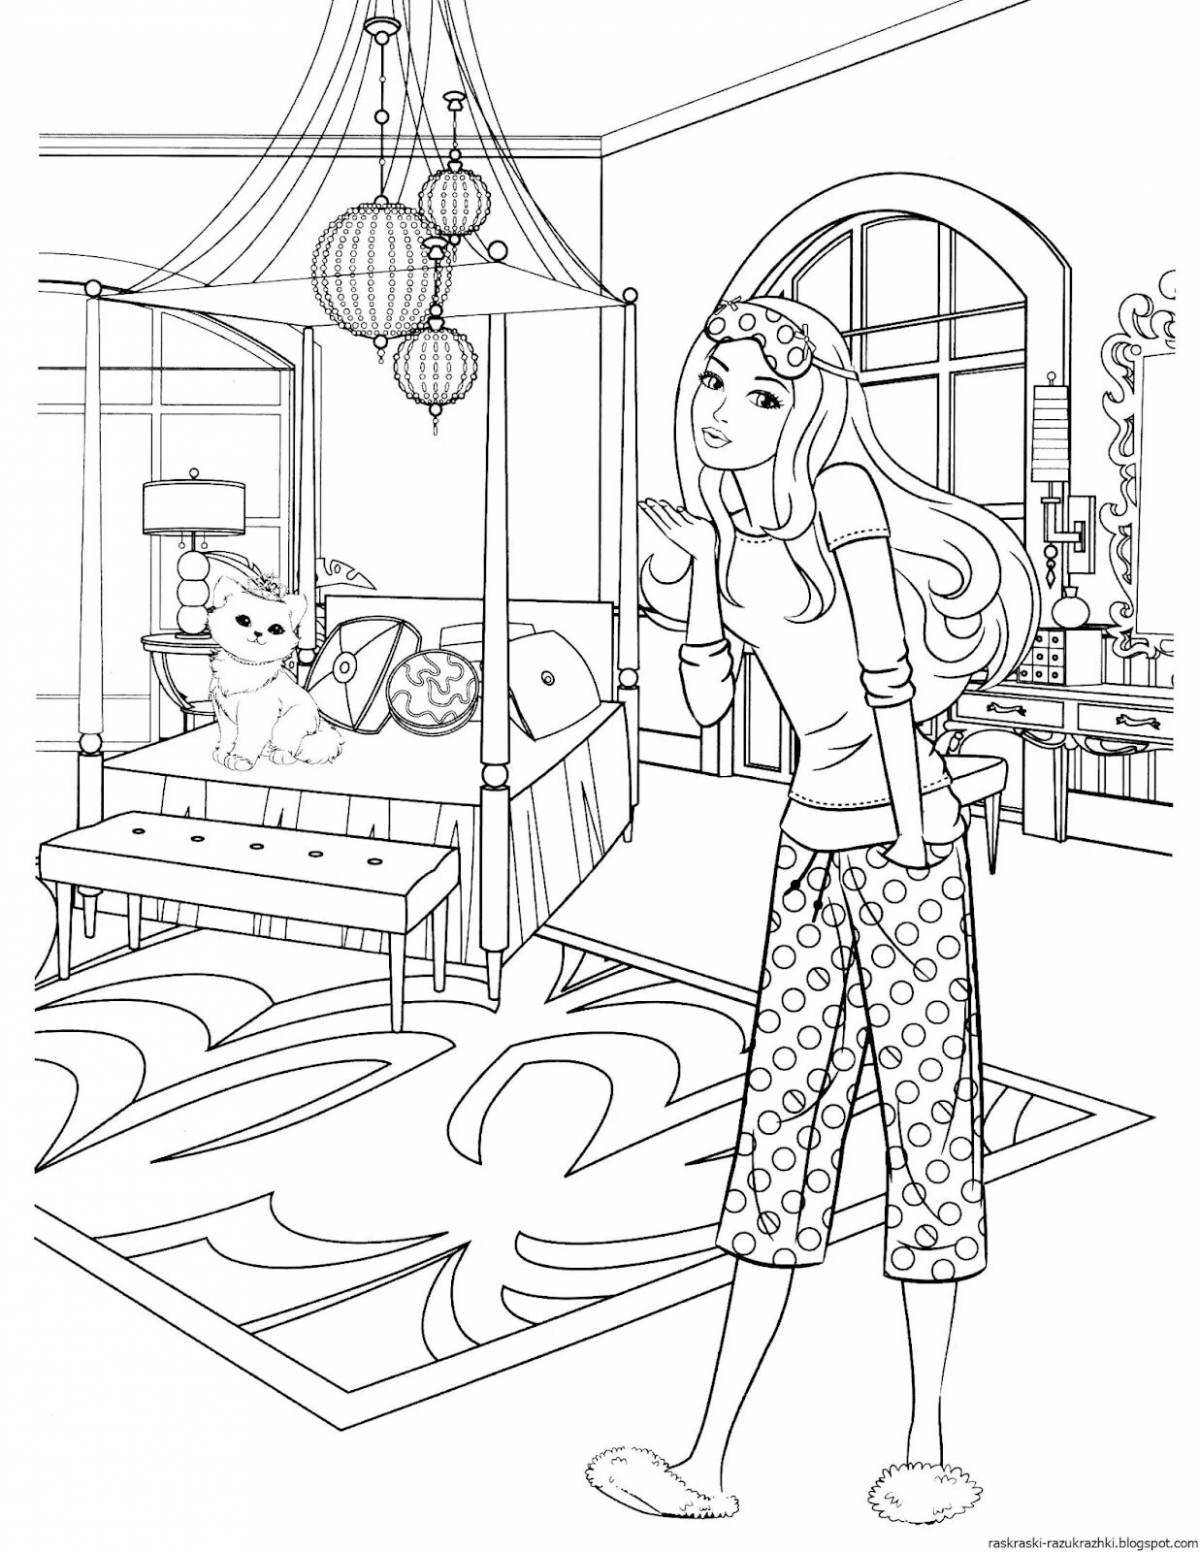 Coloring room of a glamor girl